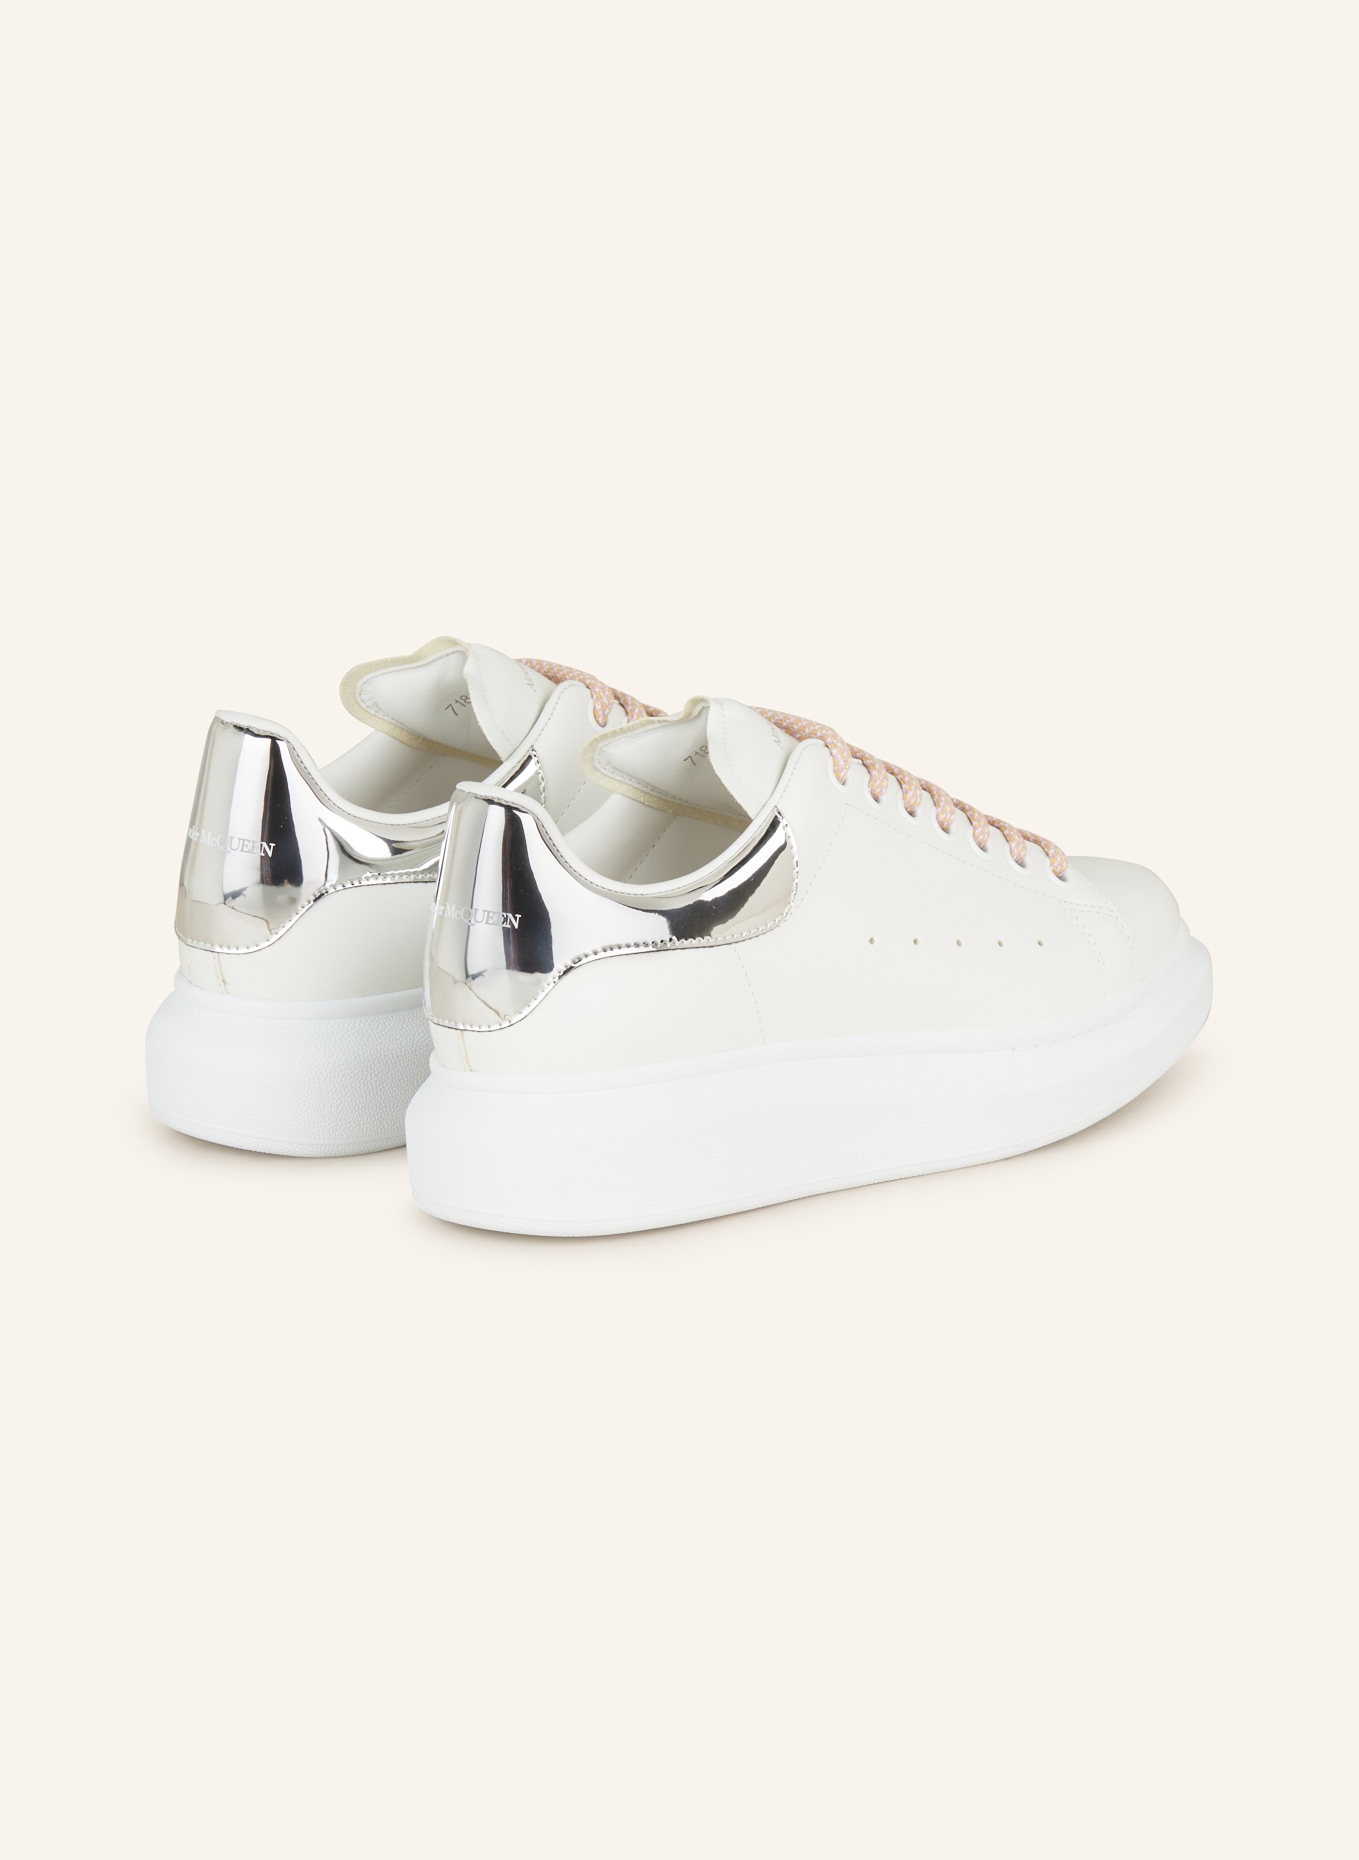 Alexander McQueen Leather White/Silver Sneakers Size 36 – Mine & Yours